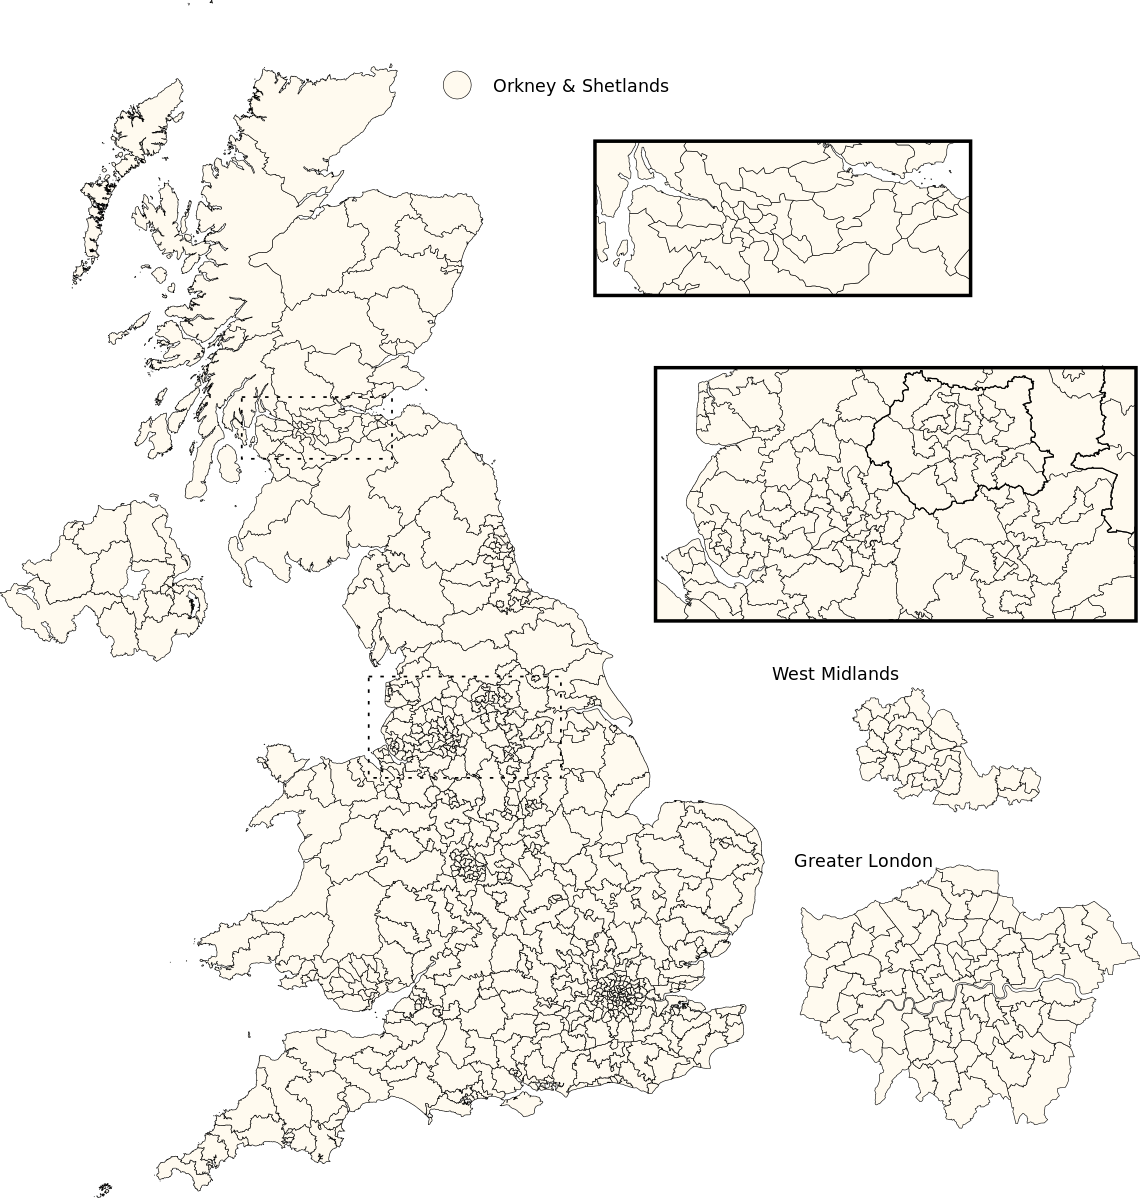 constituencies-of-the-parliament-of-the-united-kingdom-house-of-cards